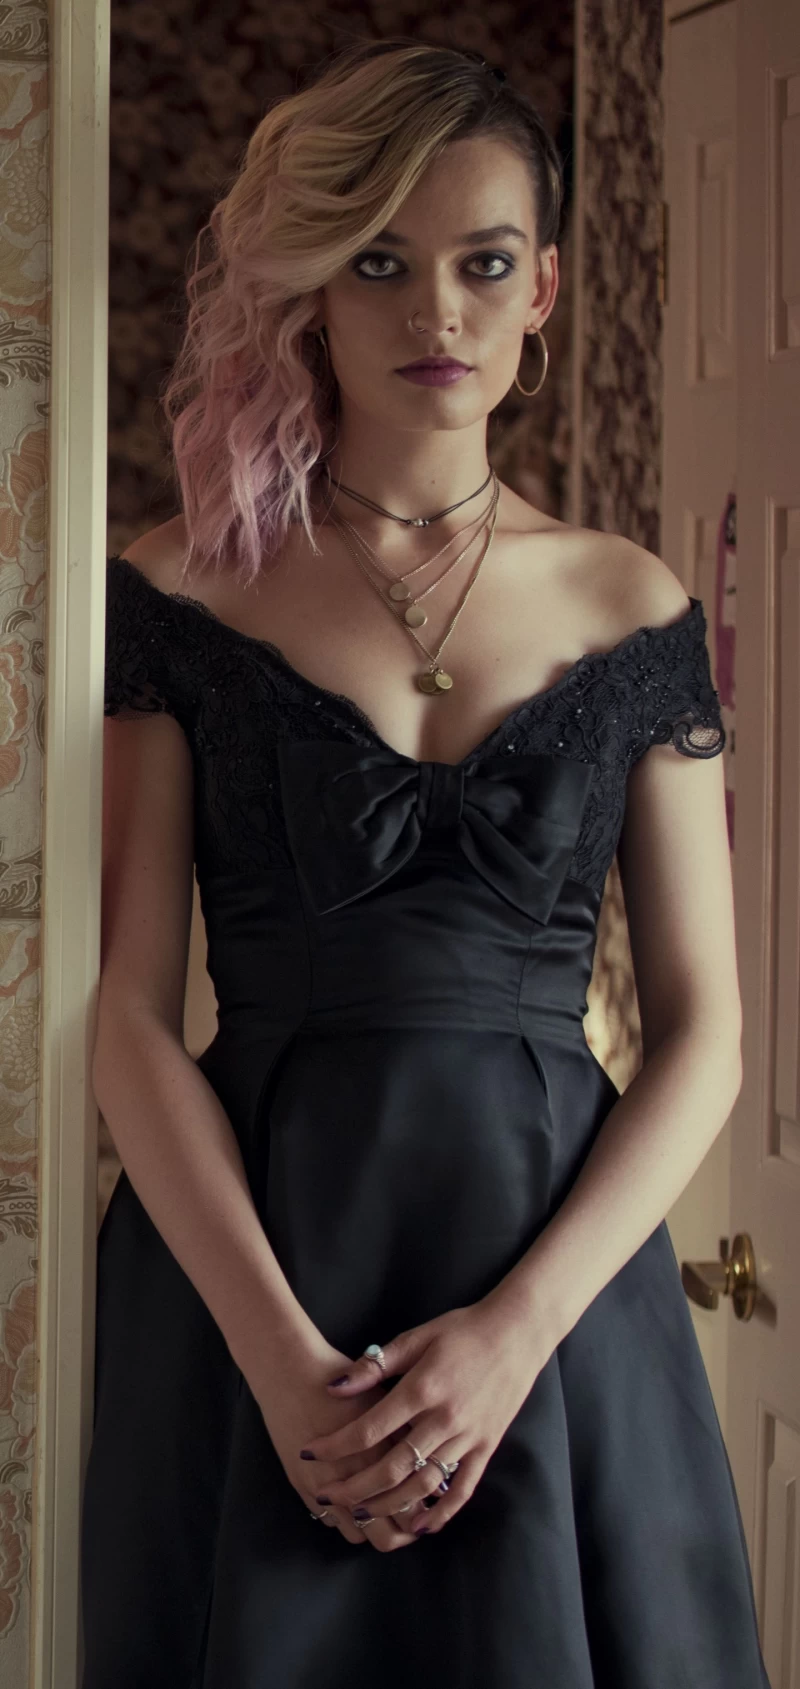 A Scene From Sex Education, The Netflix Series, Where Maeve Played By Emma Mackey, Is Wearing A Black Off-shoulder Dress.